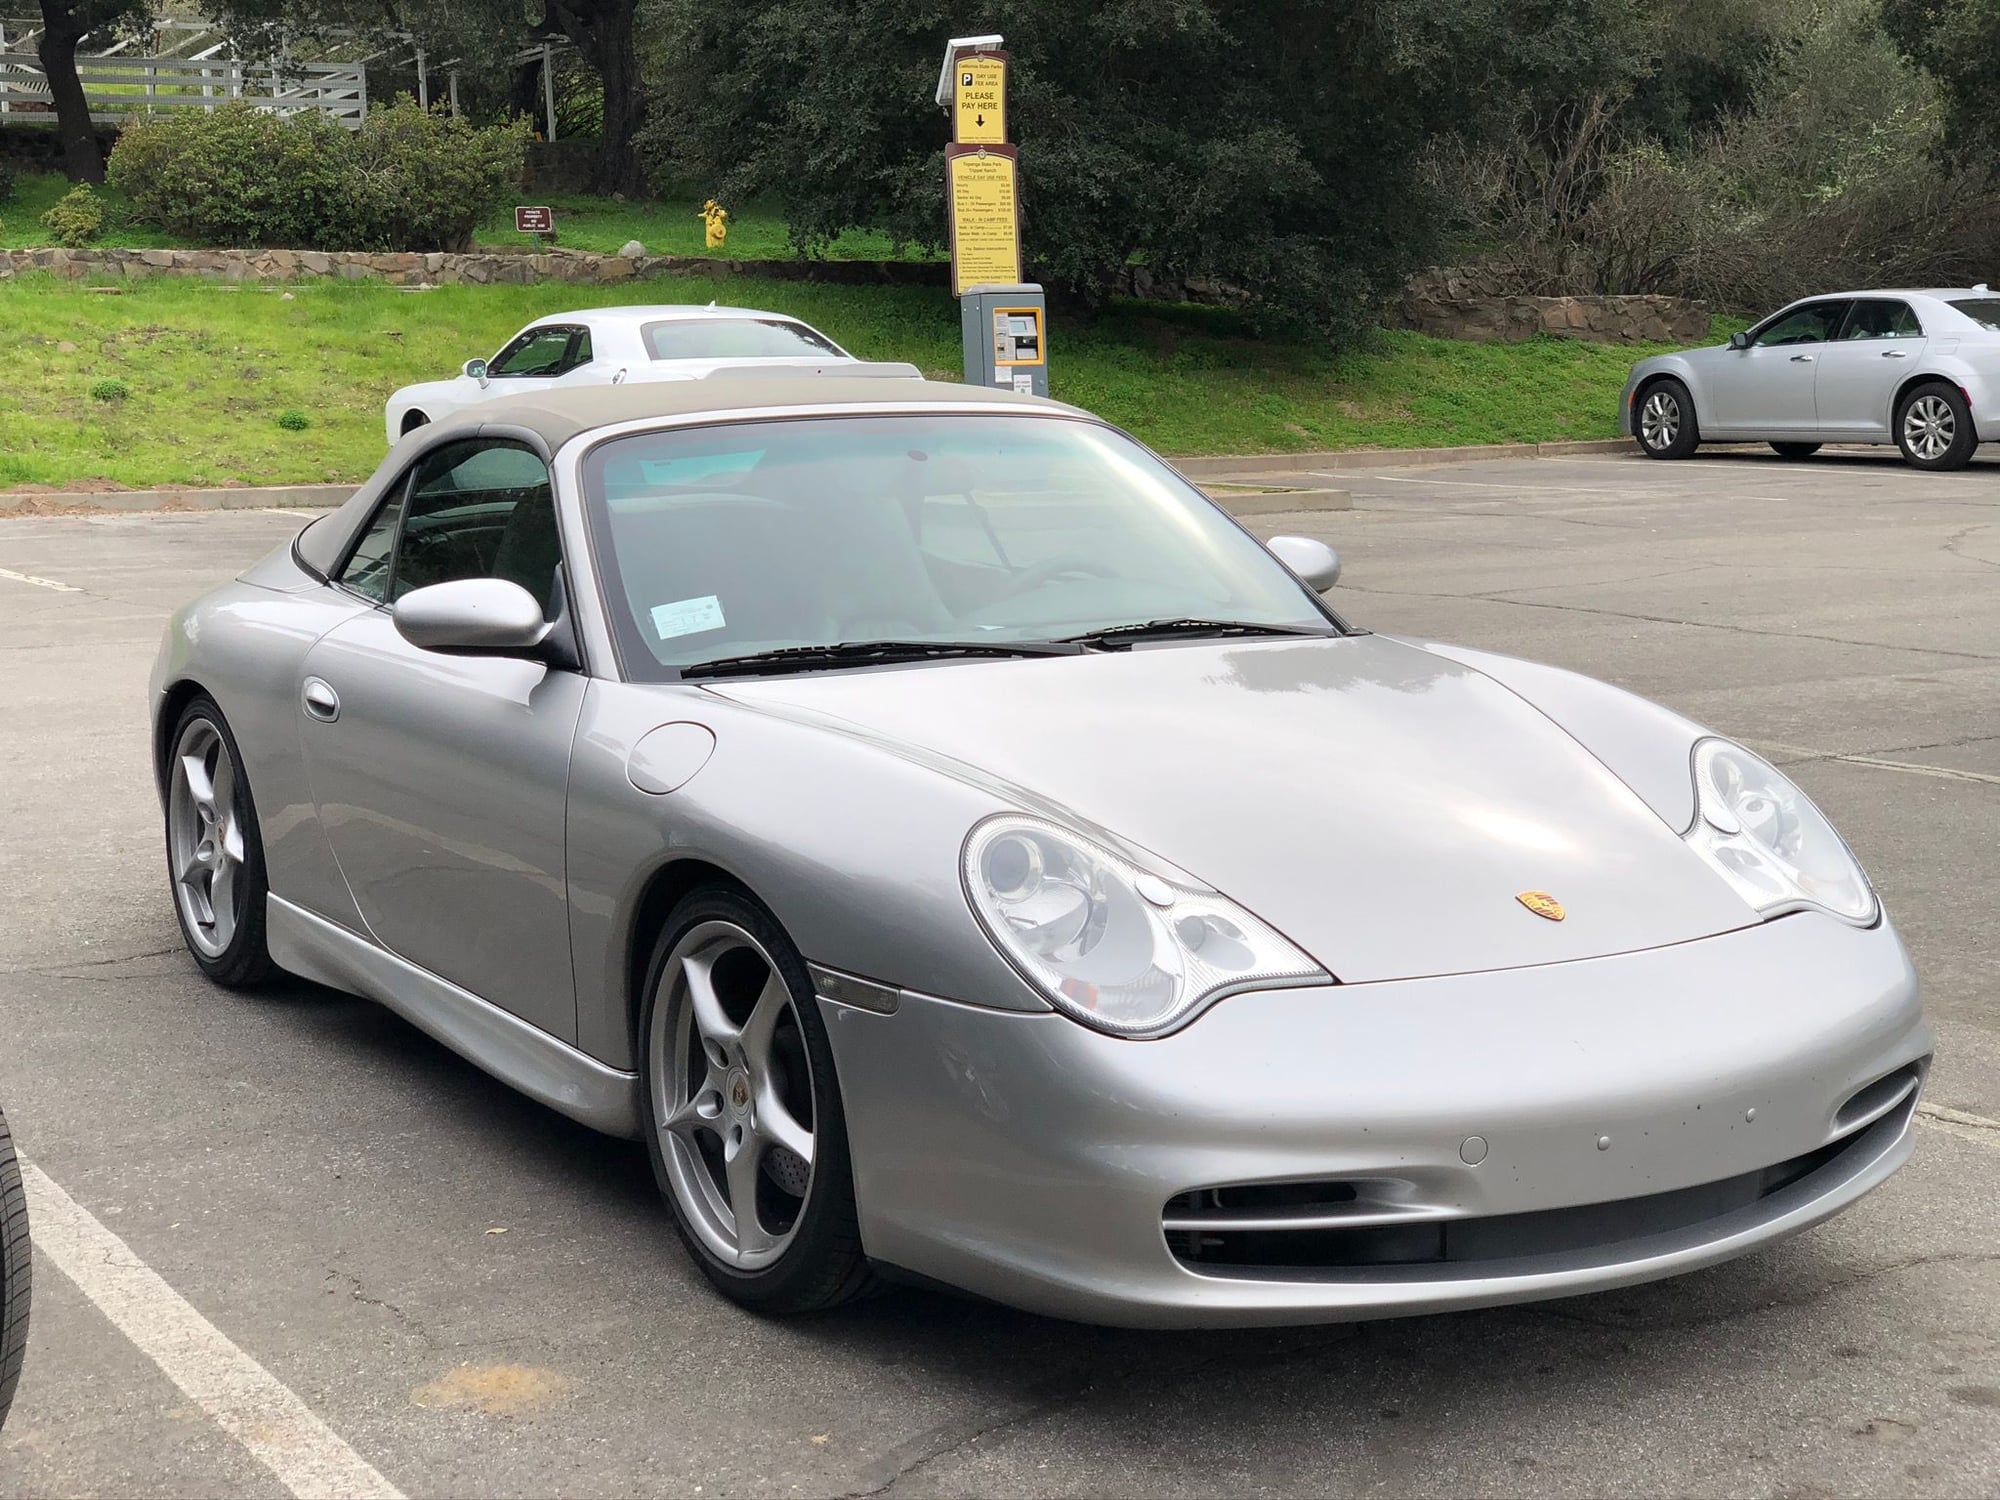 2002 Porsche 911 - C2 Manual with great service history - Used - VIN WP0CA29952S651560 - 82,000 Miles - 6 cyl - 2WD - Manual - Convertible - Silver - Sherman Oaks, CA 91423, United States